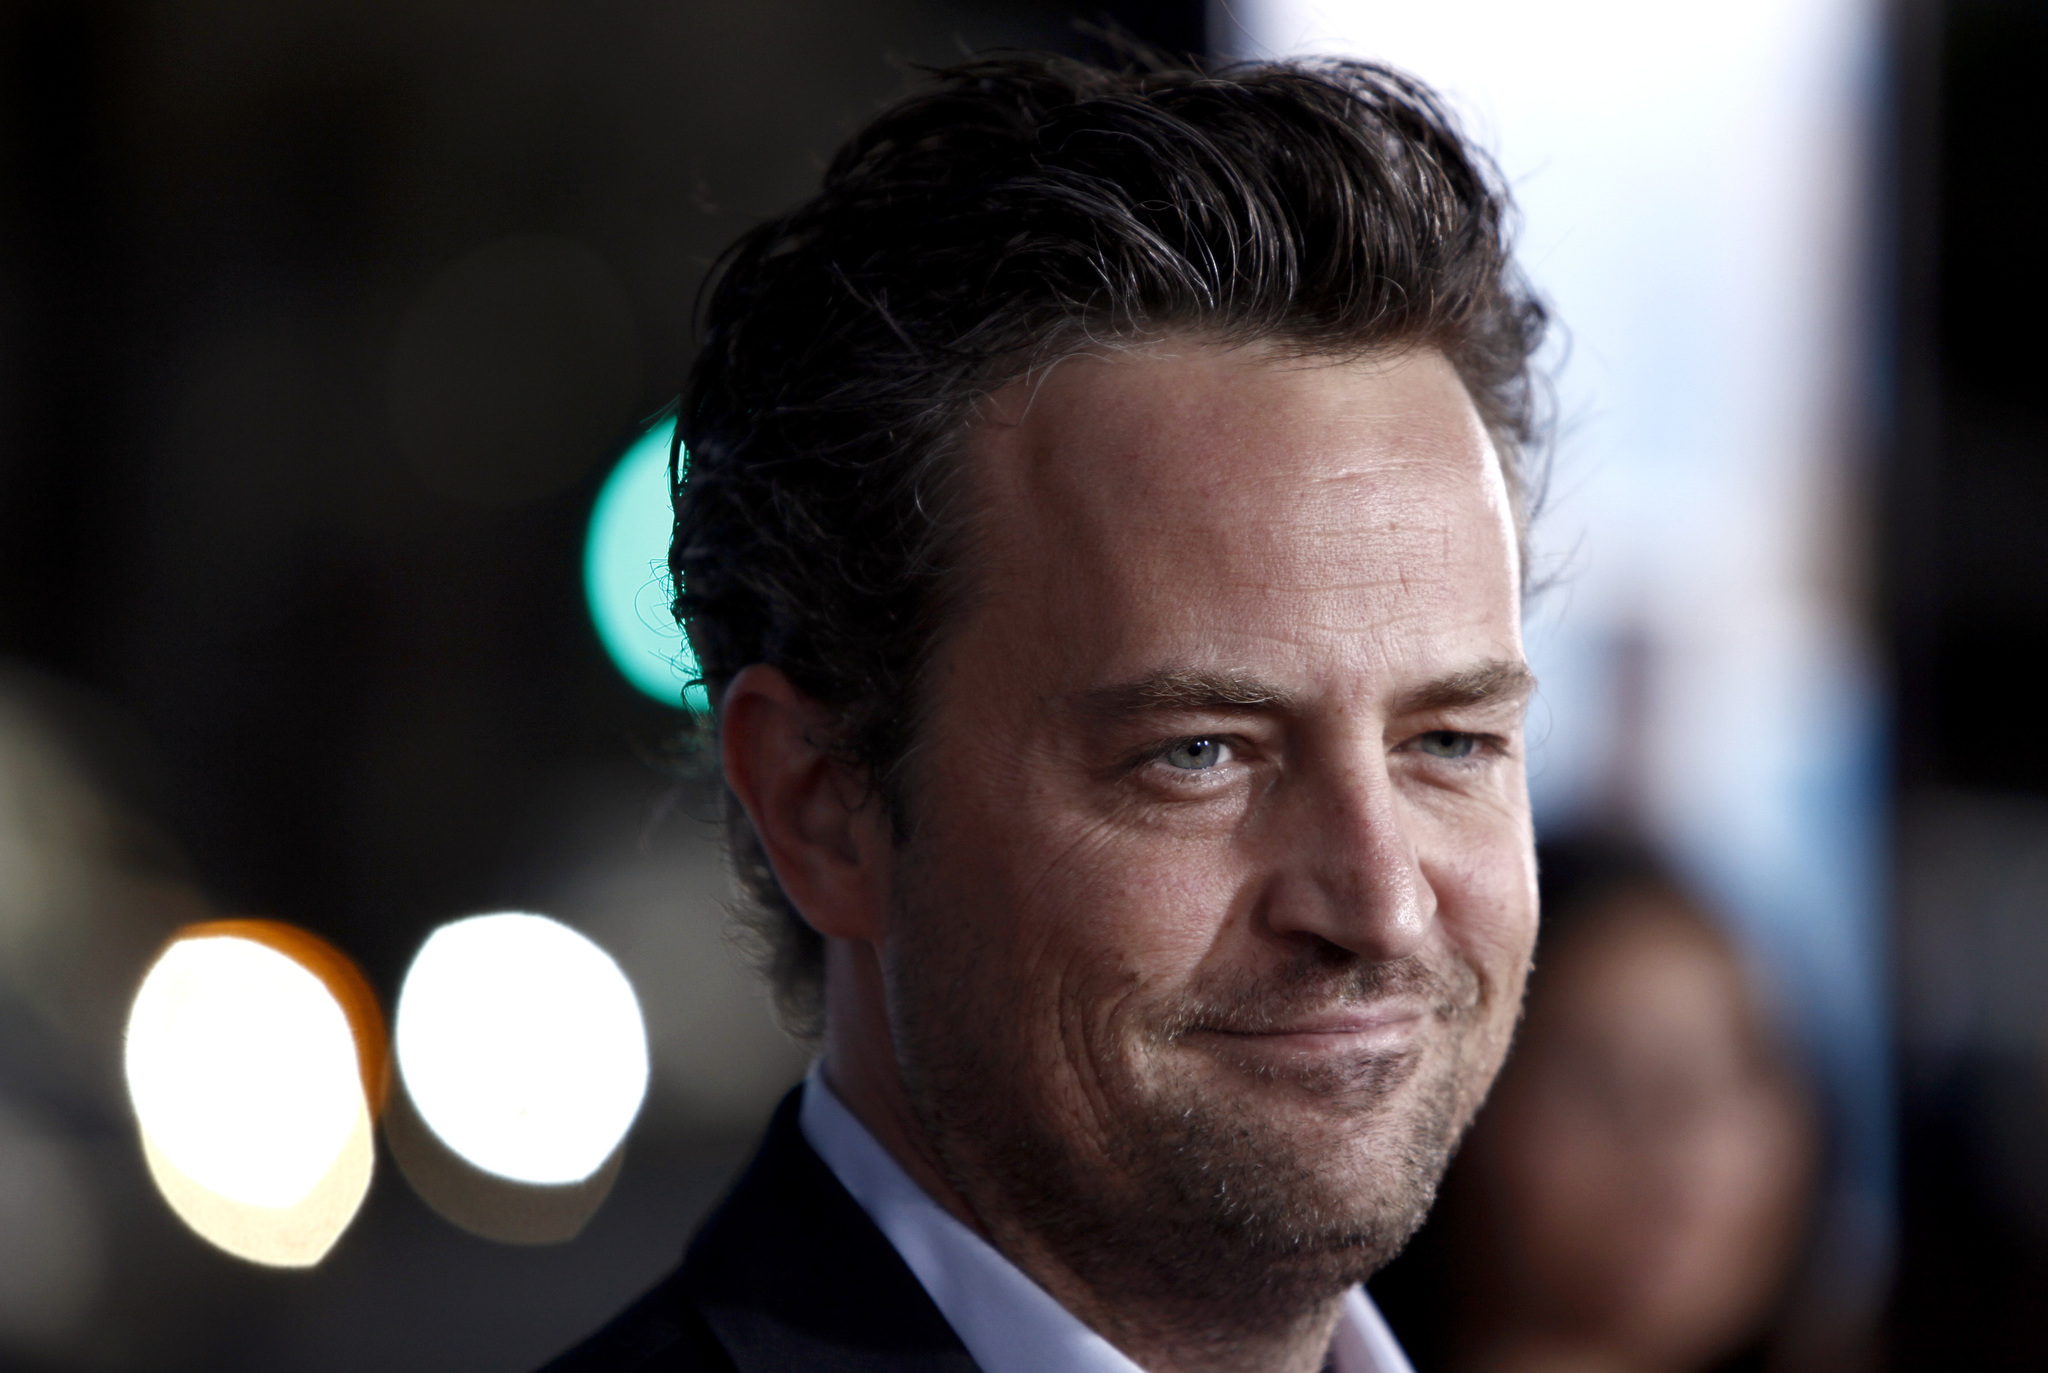 Matthew Perry arrives at the premiere of "The Invention of Lying" in Los Angeles on Monday, Sept. 21, 2009. Perry, who starred as Chandler Bing in the hit series 